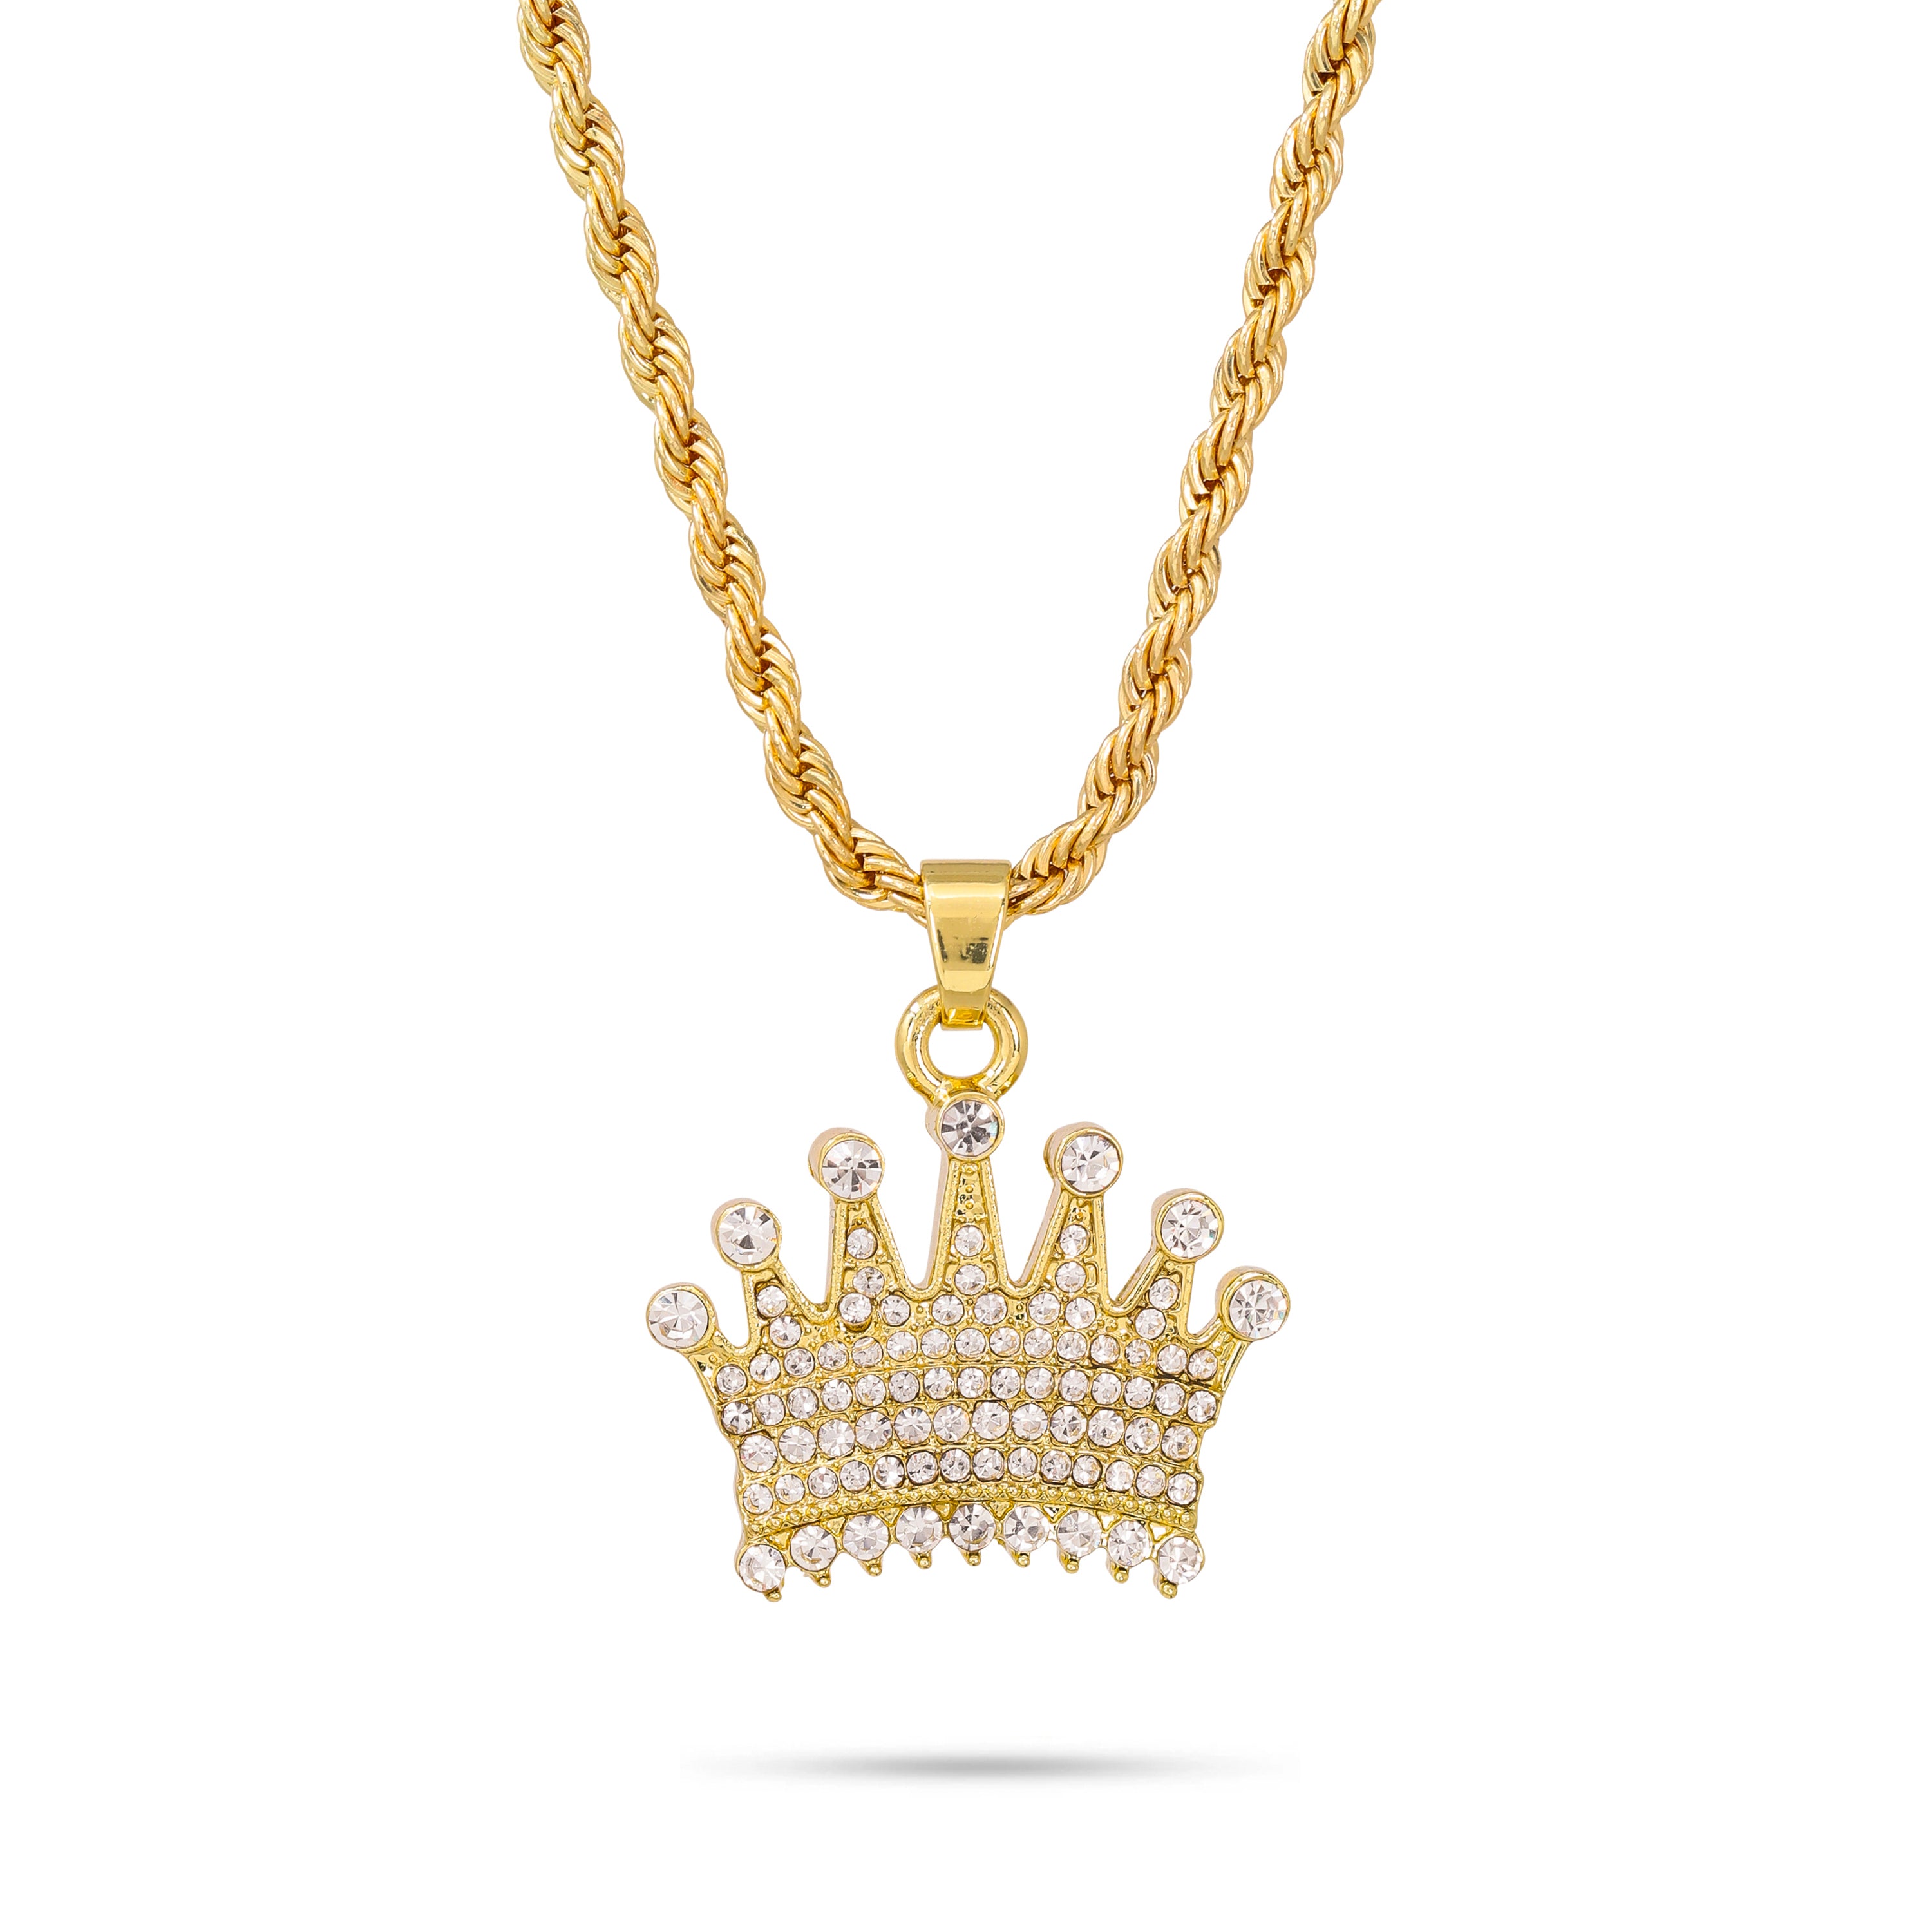 MINI ICED CROWN NECKLACE GOLD